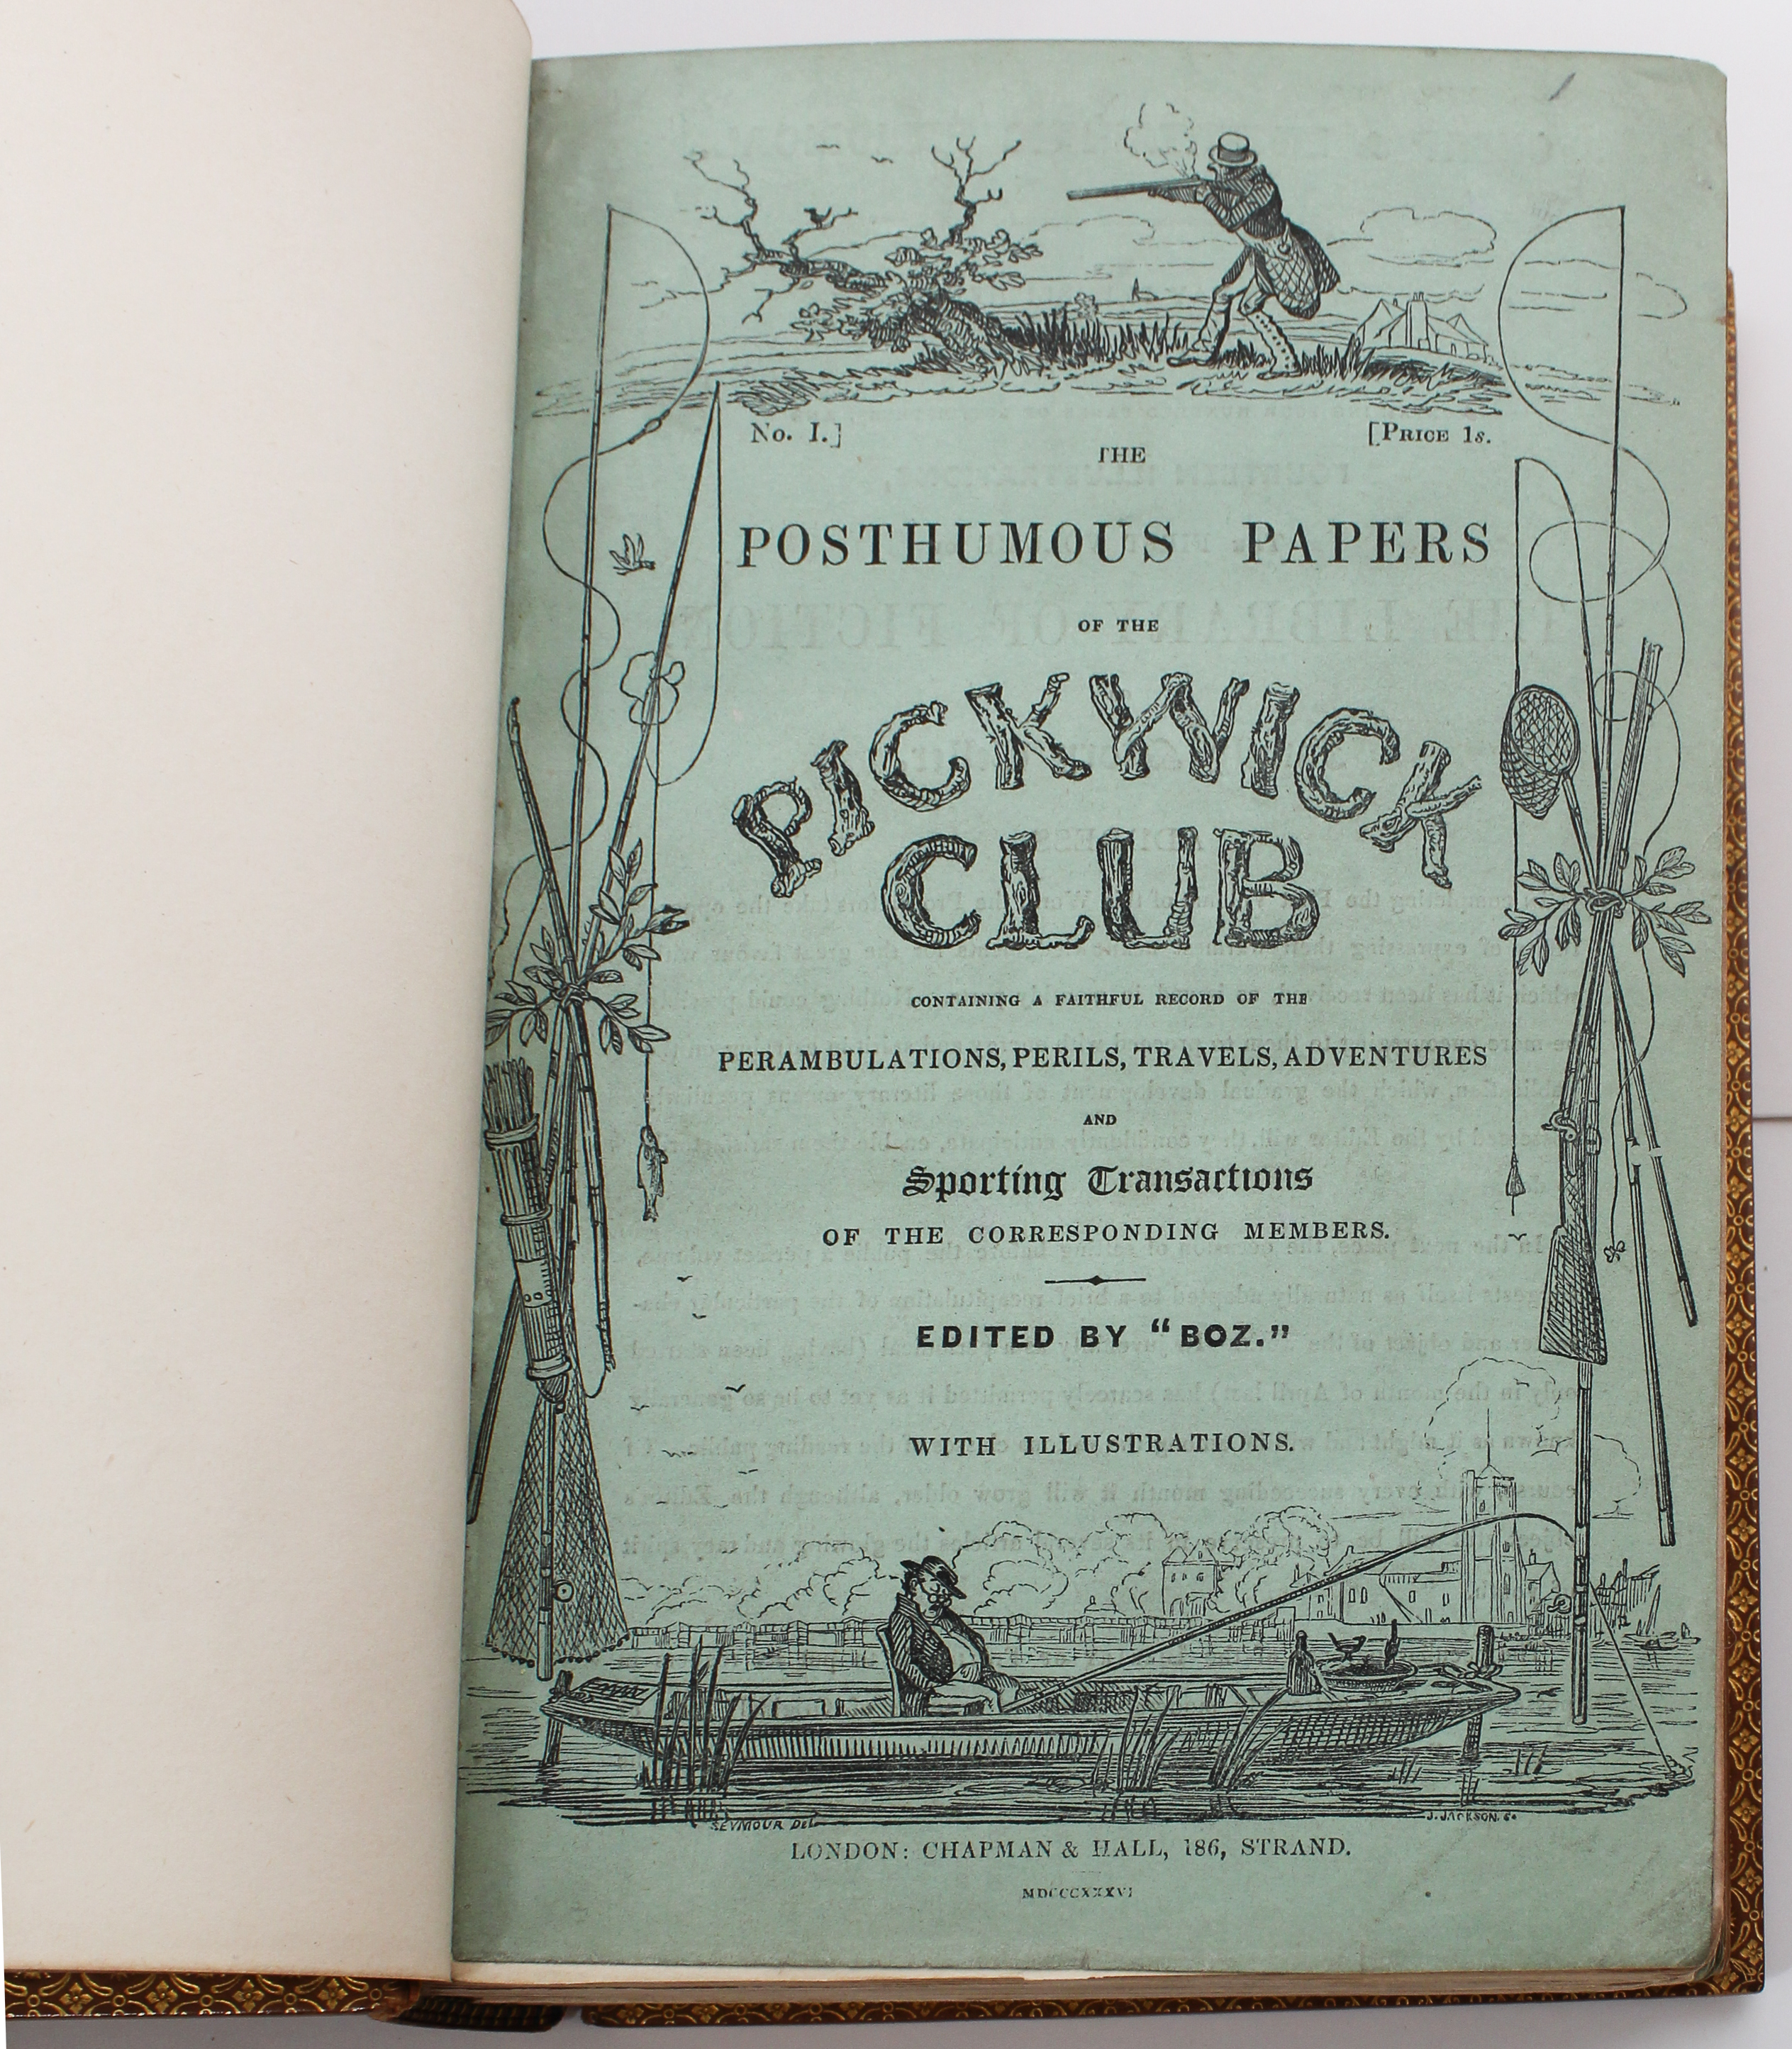 Dickens, Pickwick Papers, Book Form 1836 - Image 2 of 6